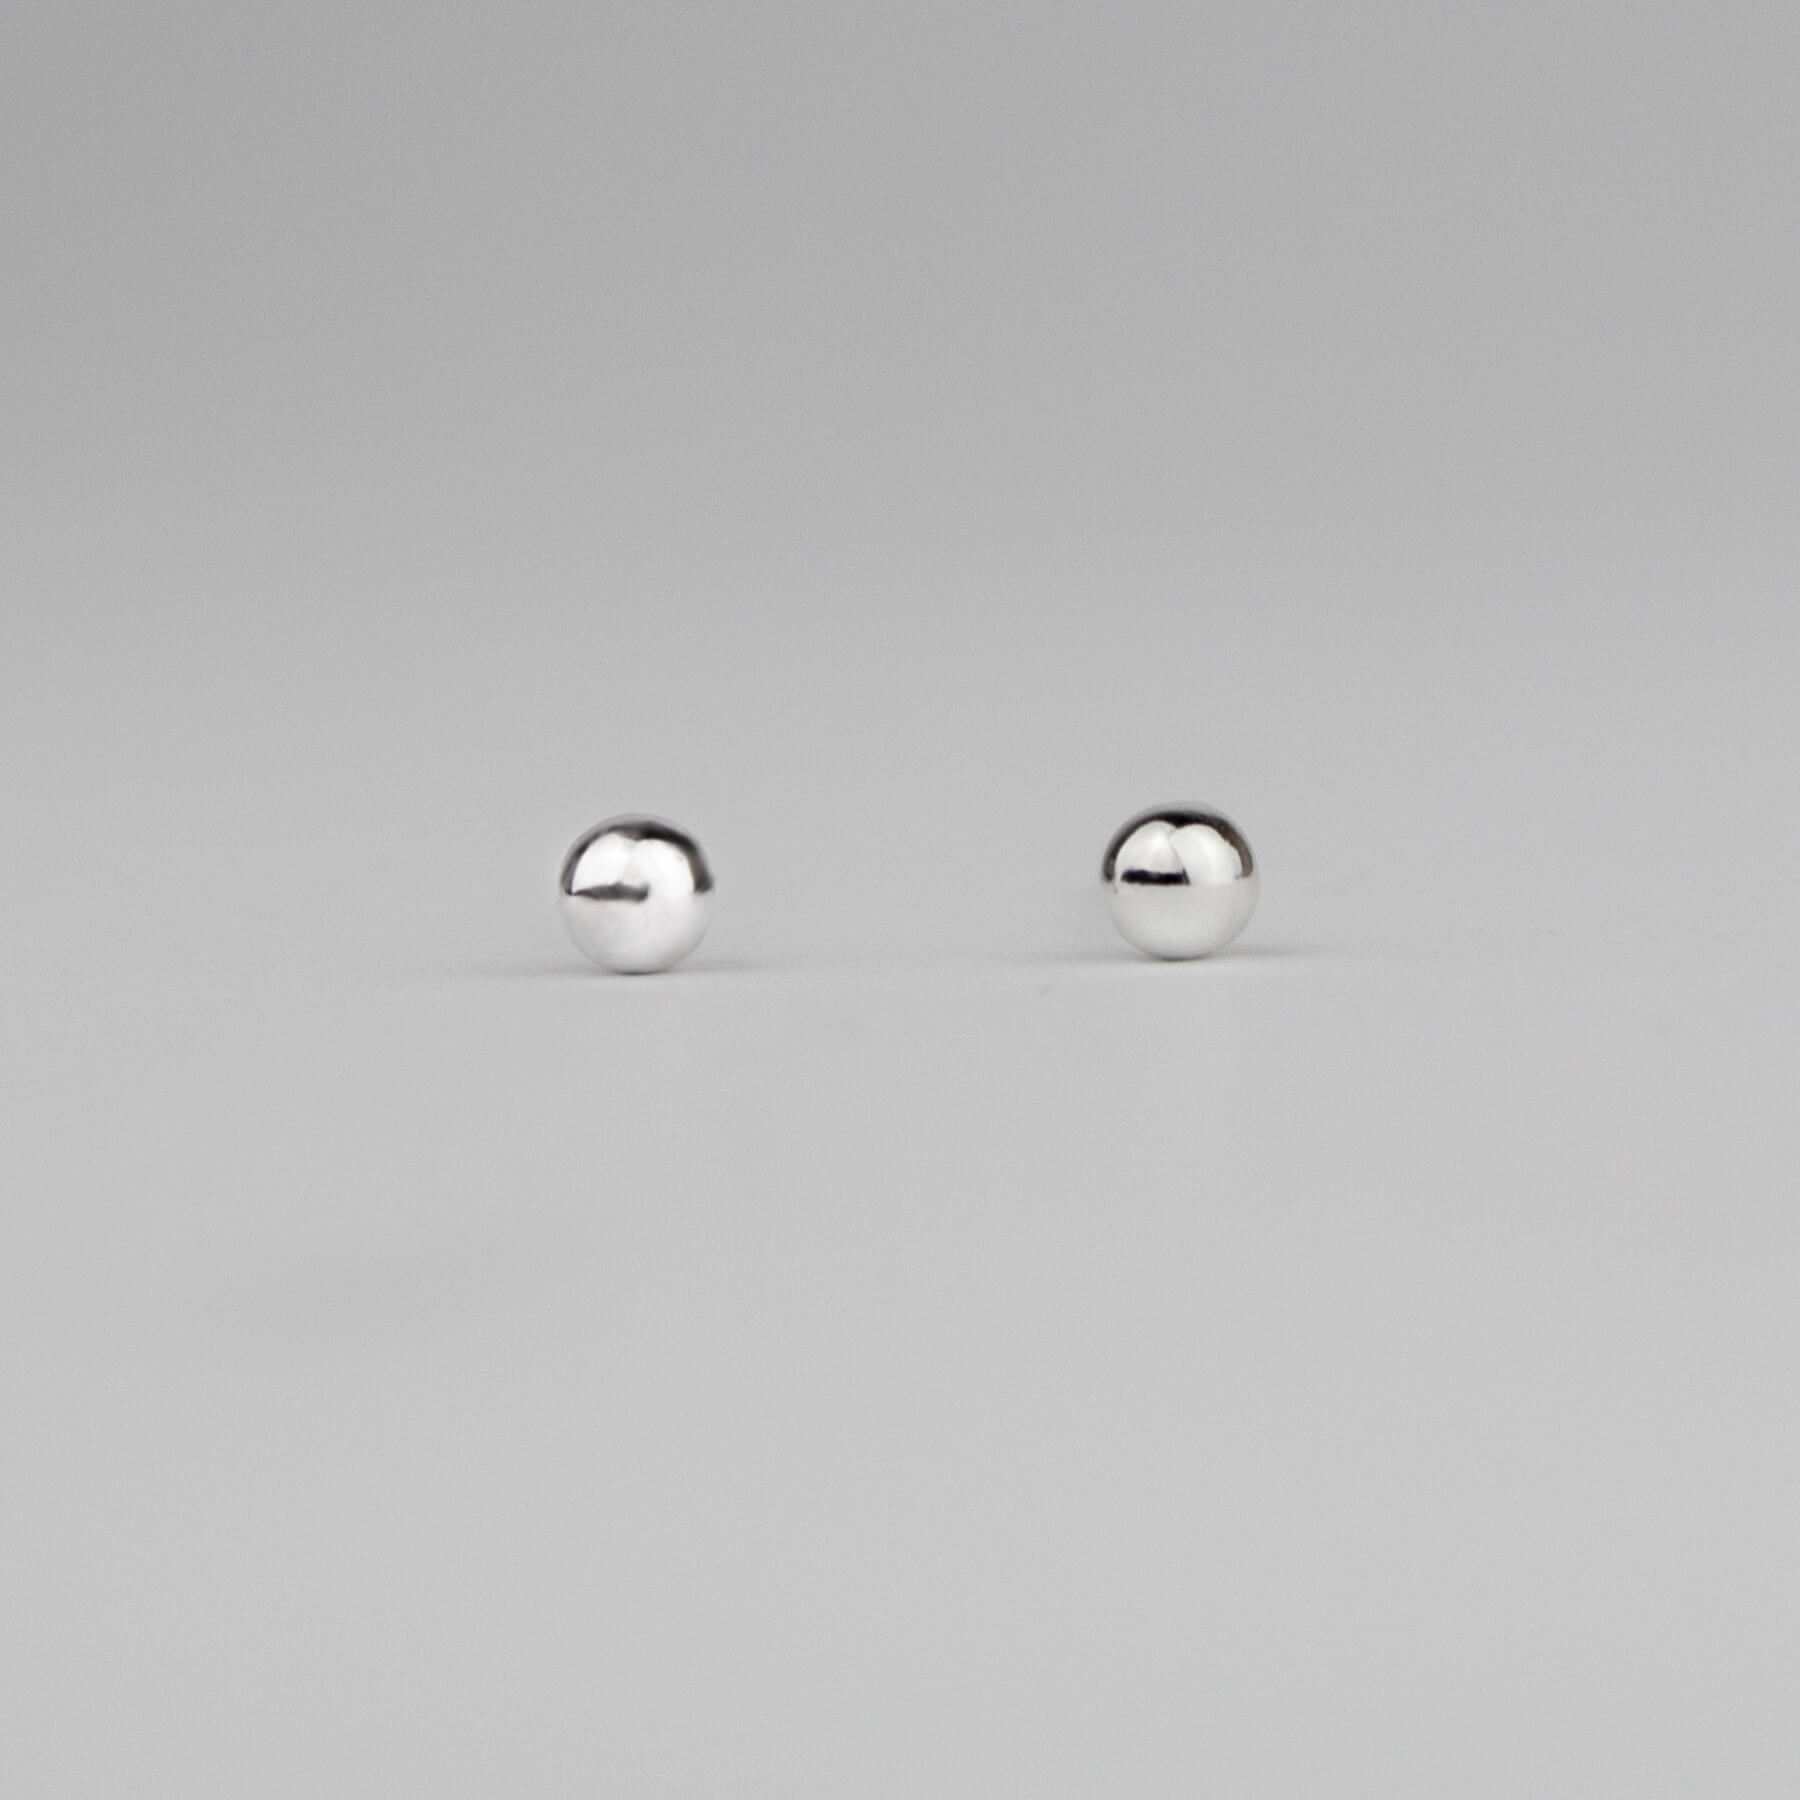 Silver ball earrings on a light background